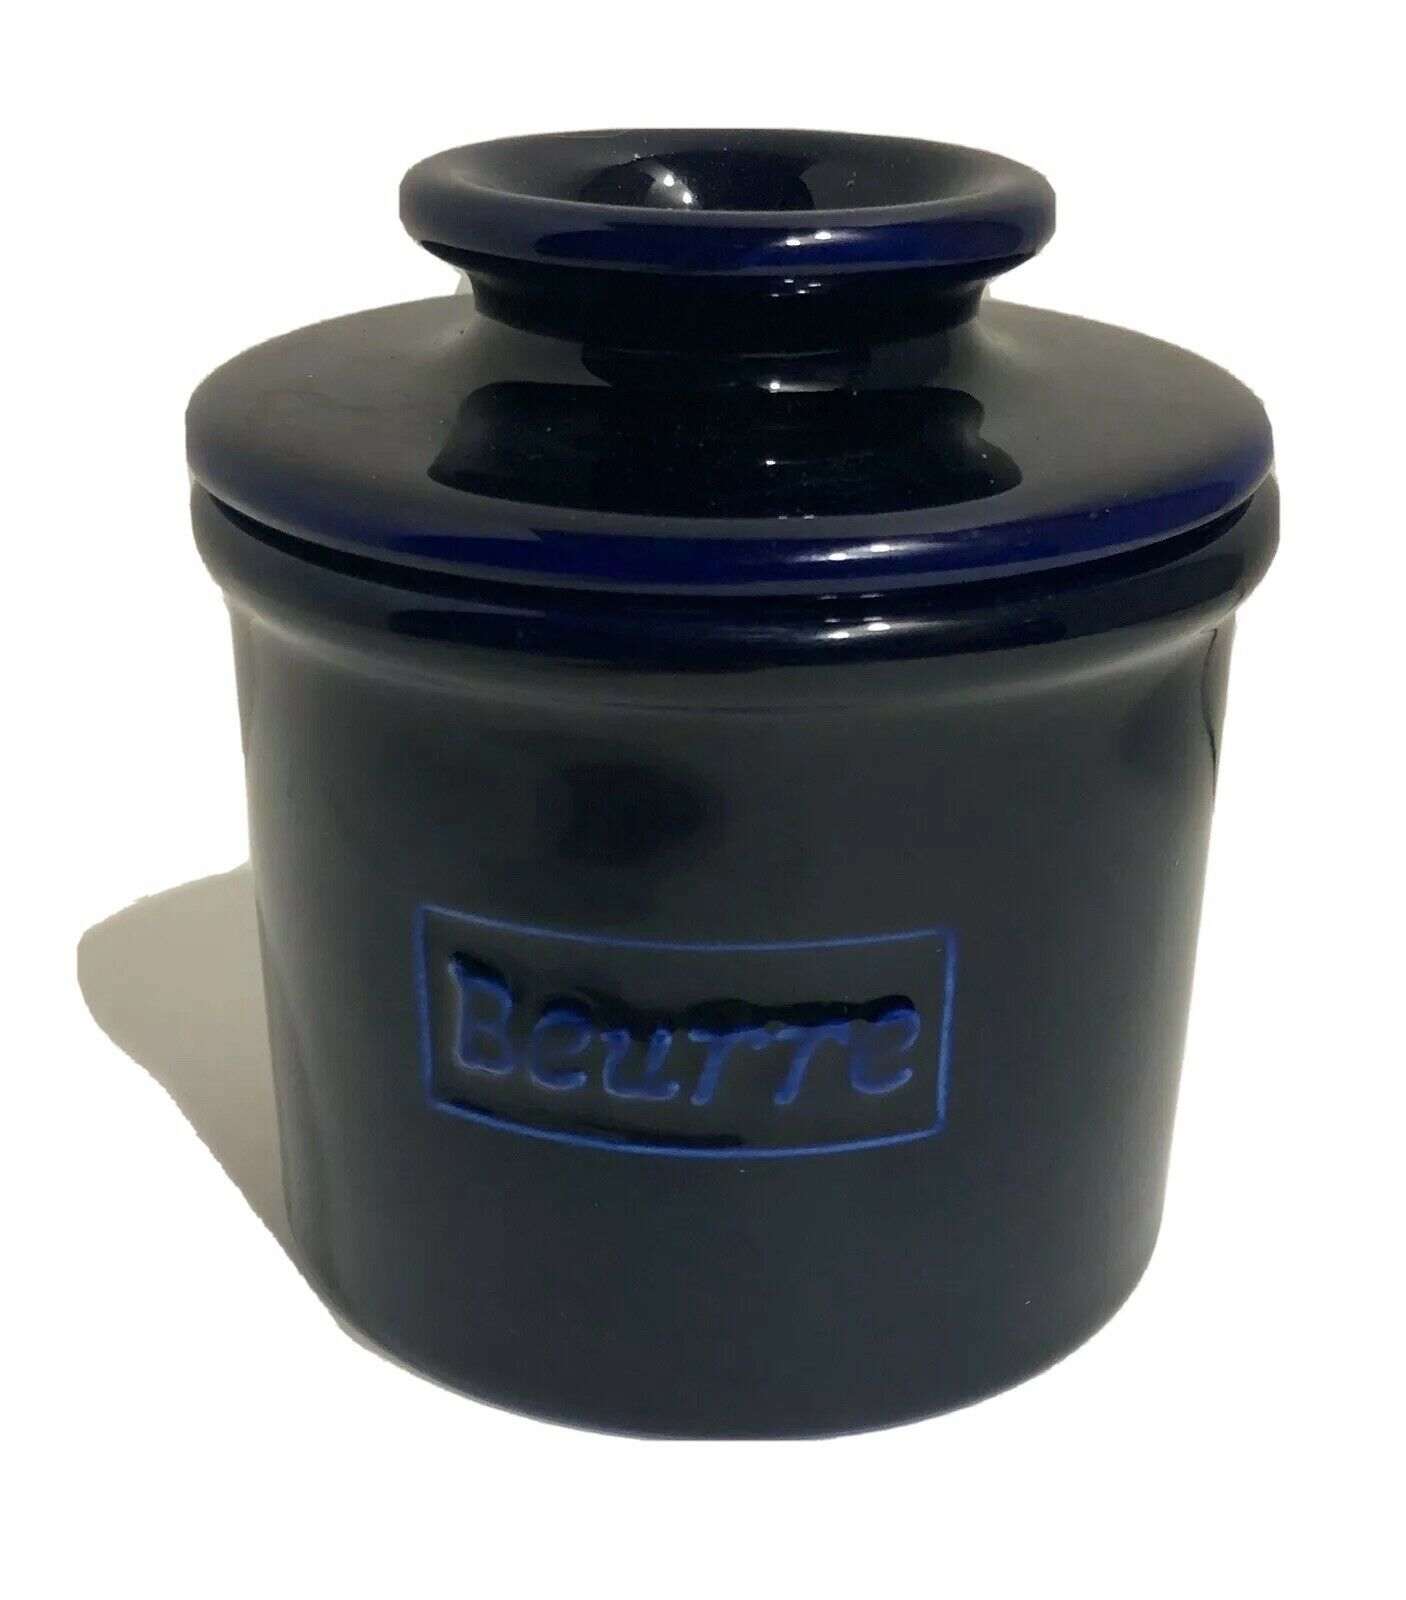 Butter Bell Crock By L.tremain 2013 French Ceramic Cobalt Blue Two Piece